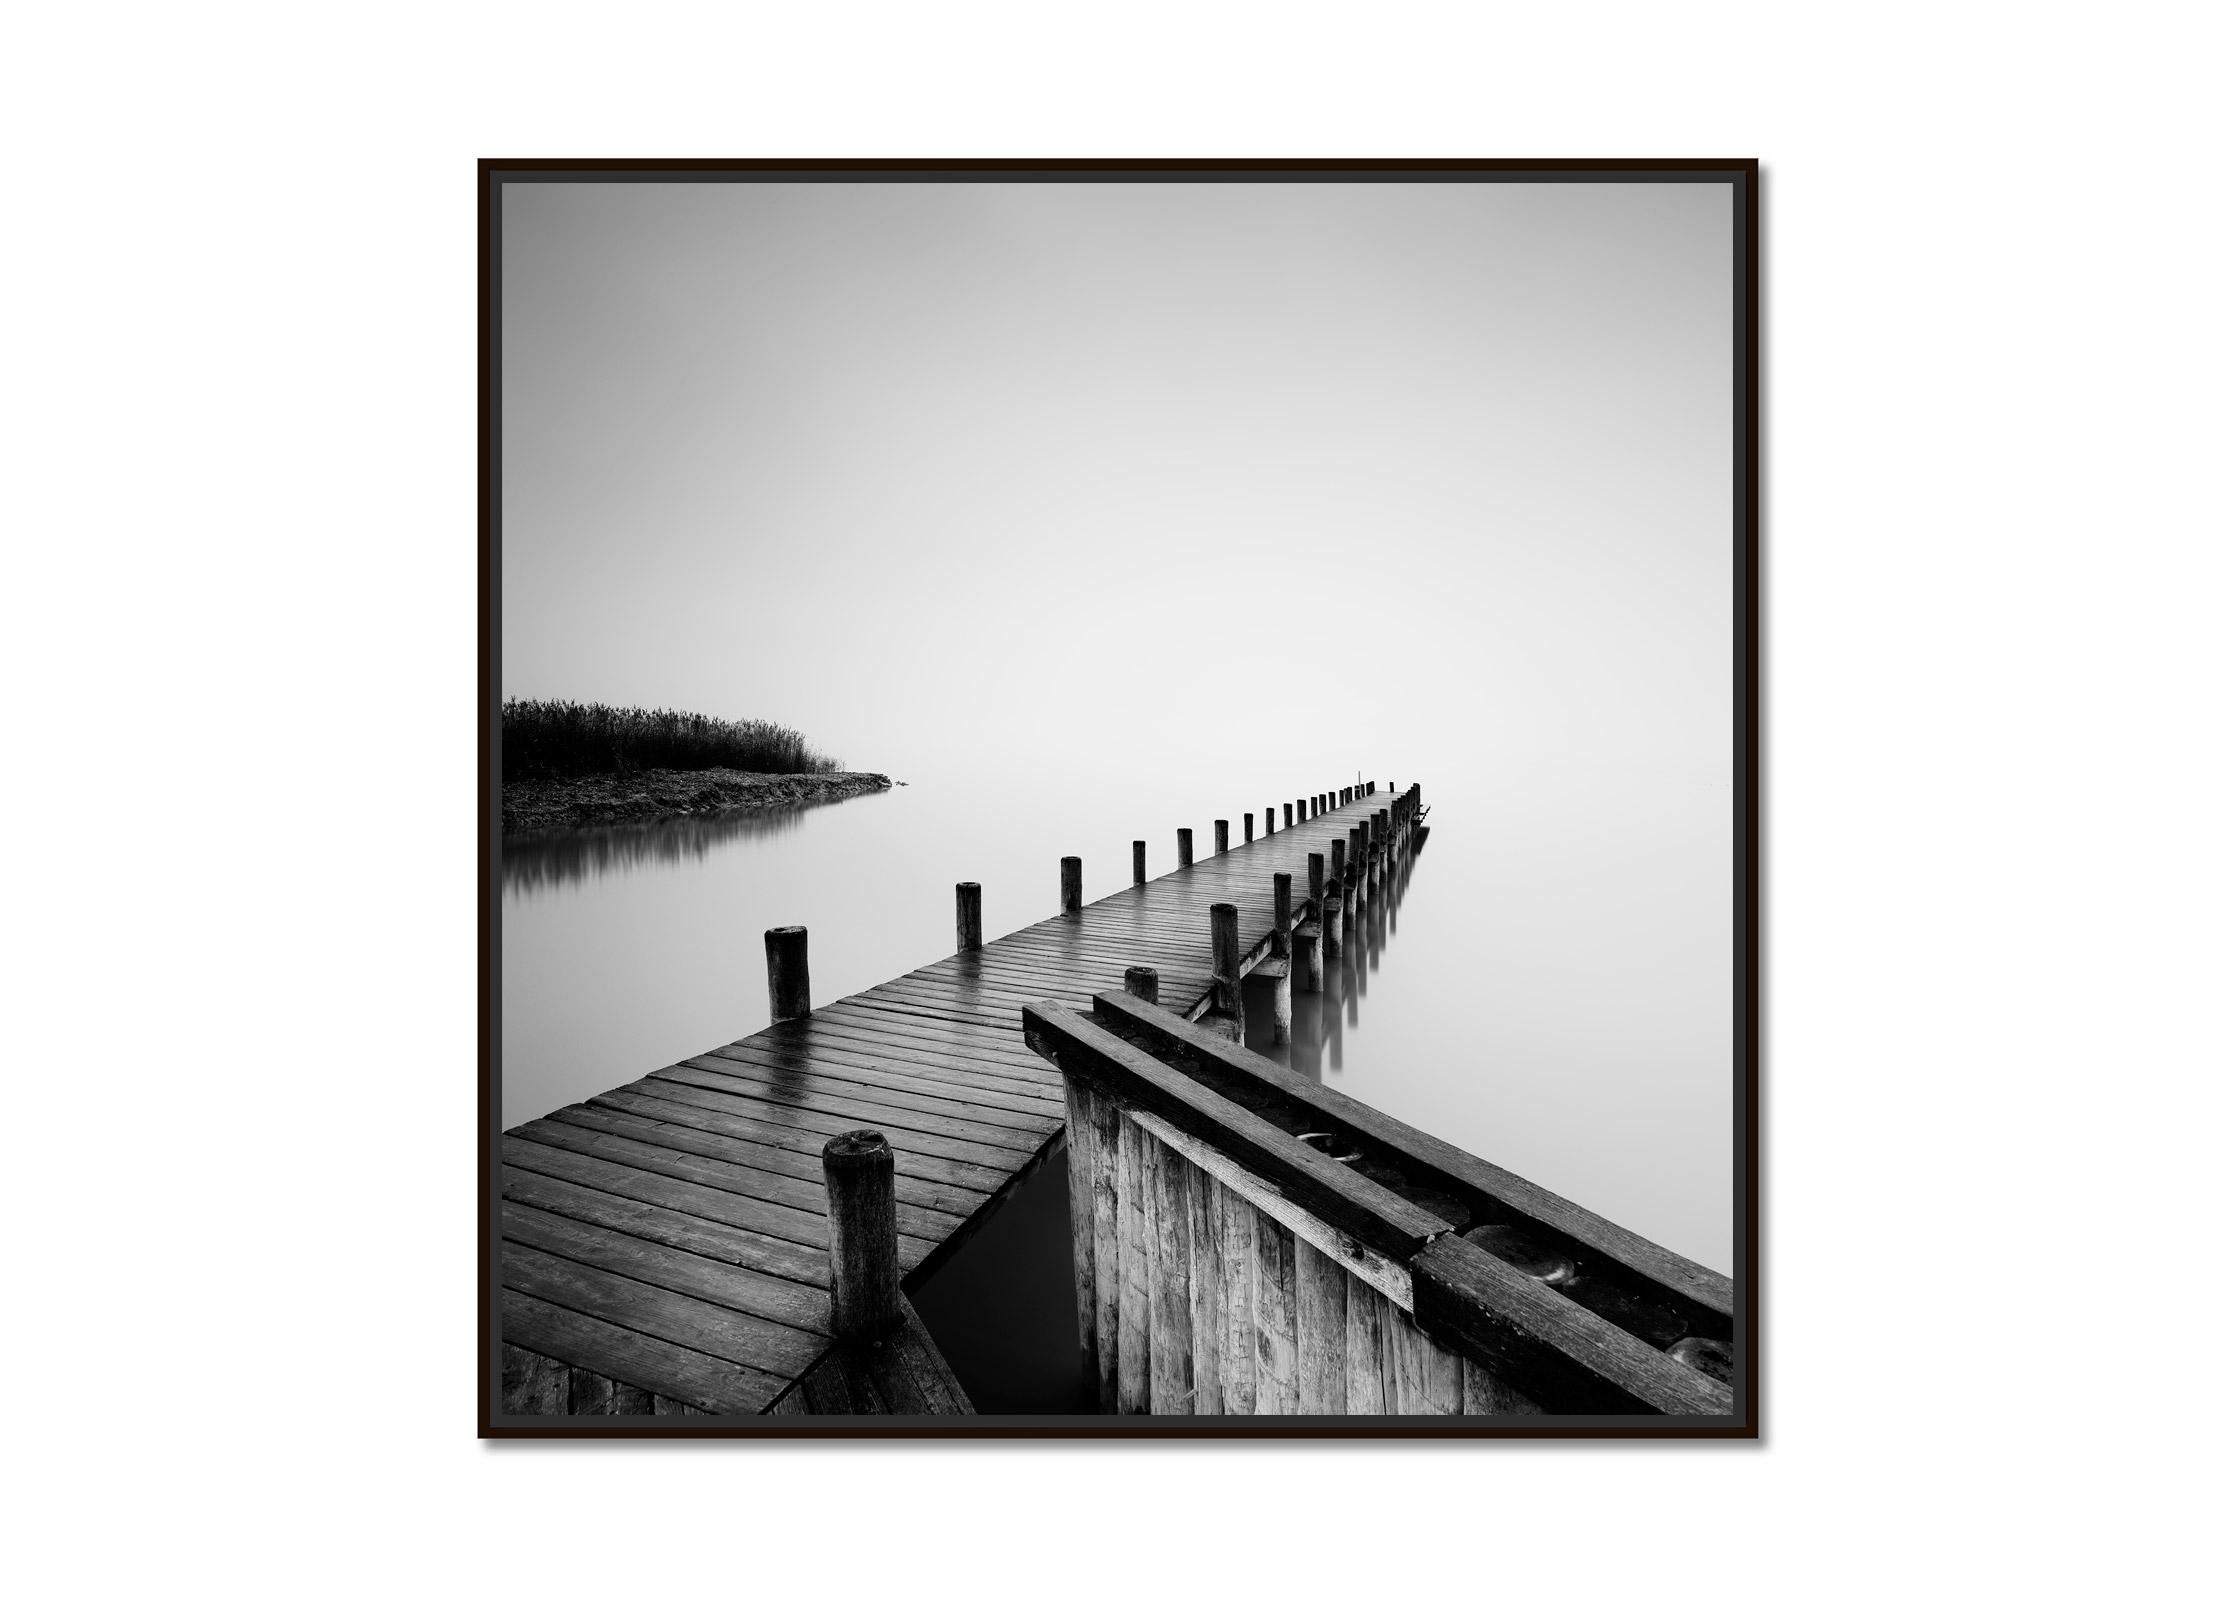 Jetty on calm Lake, silent misty morning, black and white, fine art waterscape - Photograph by Gerald Berghammer